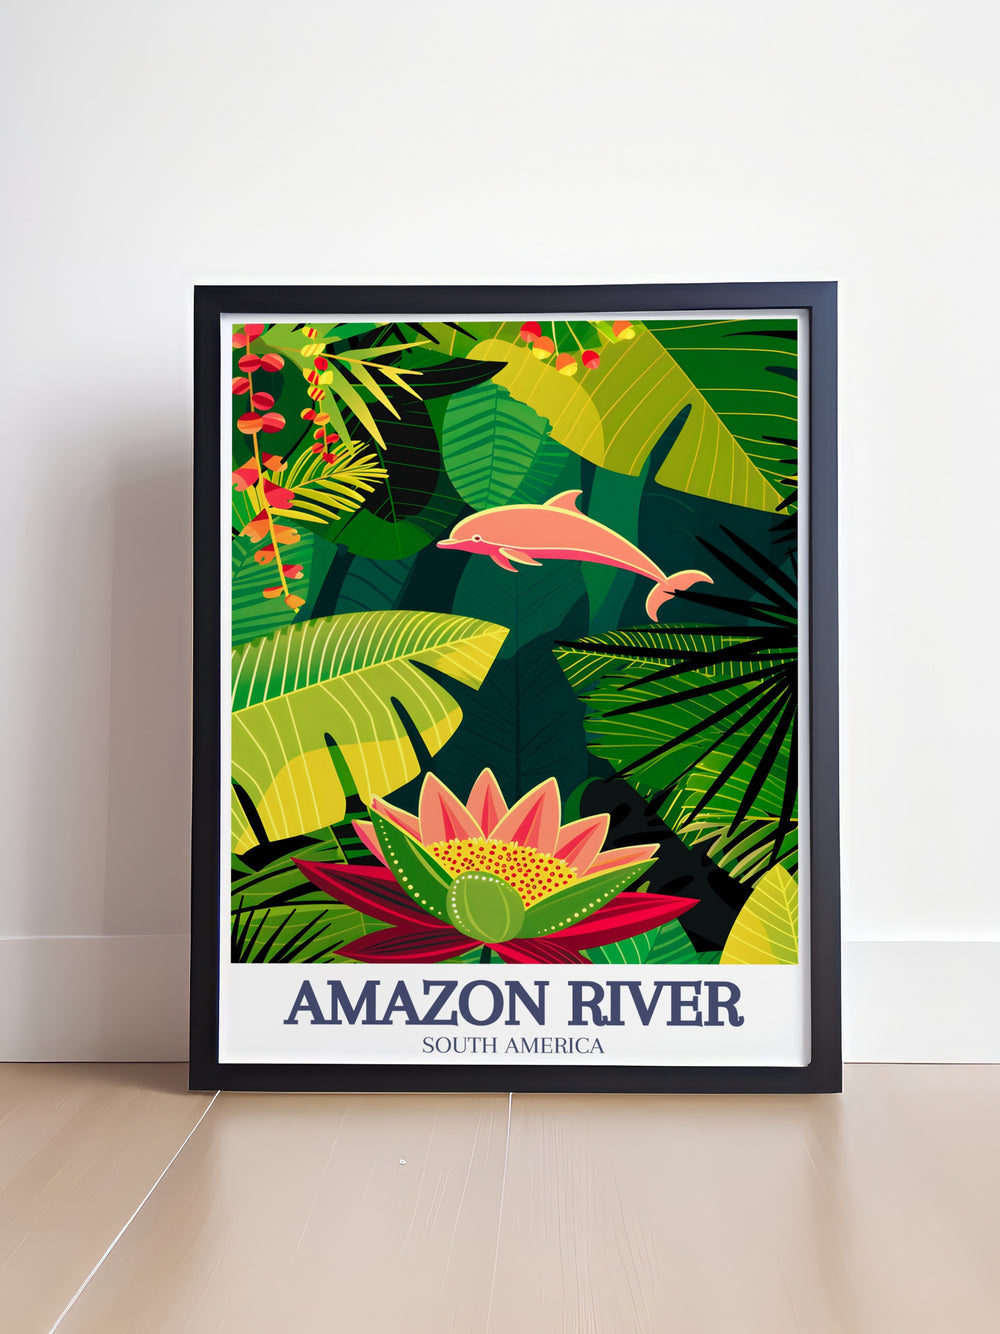 Beautiful Victoria Regia water lily, Amazon river dolphin print capturing the unique charm of the Amazon. This vintage poster is an ideal addition to any travel poster collection, offering a detailed and vibrant portrayal of these iconic natural wonders.